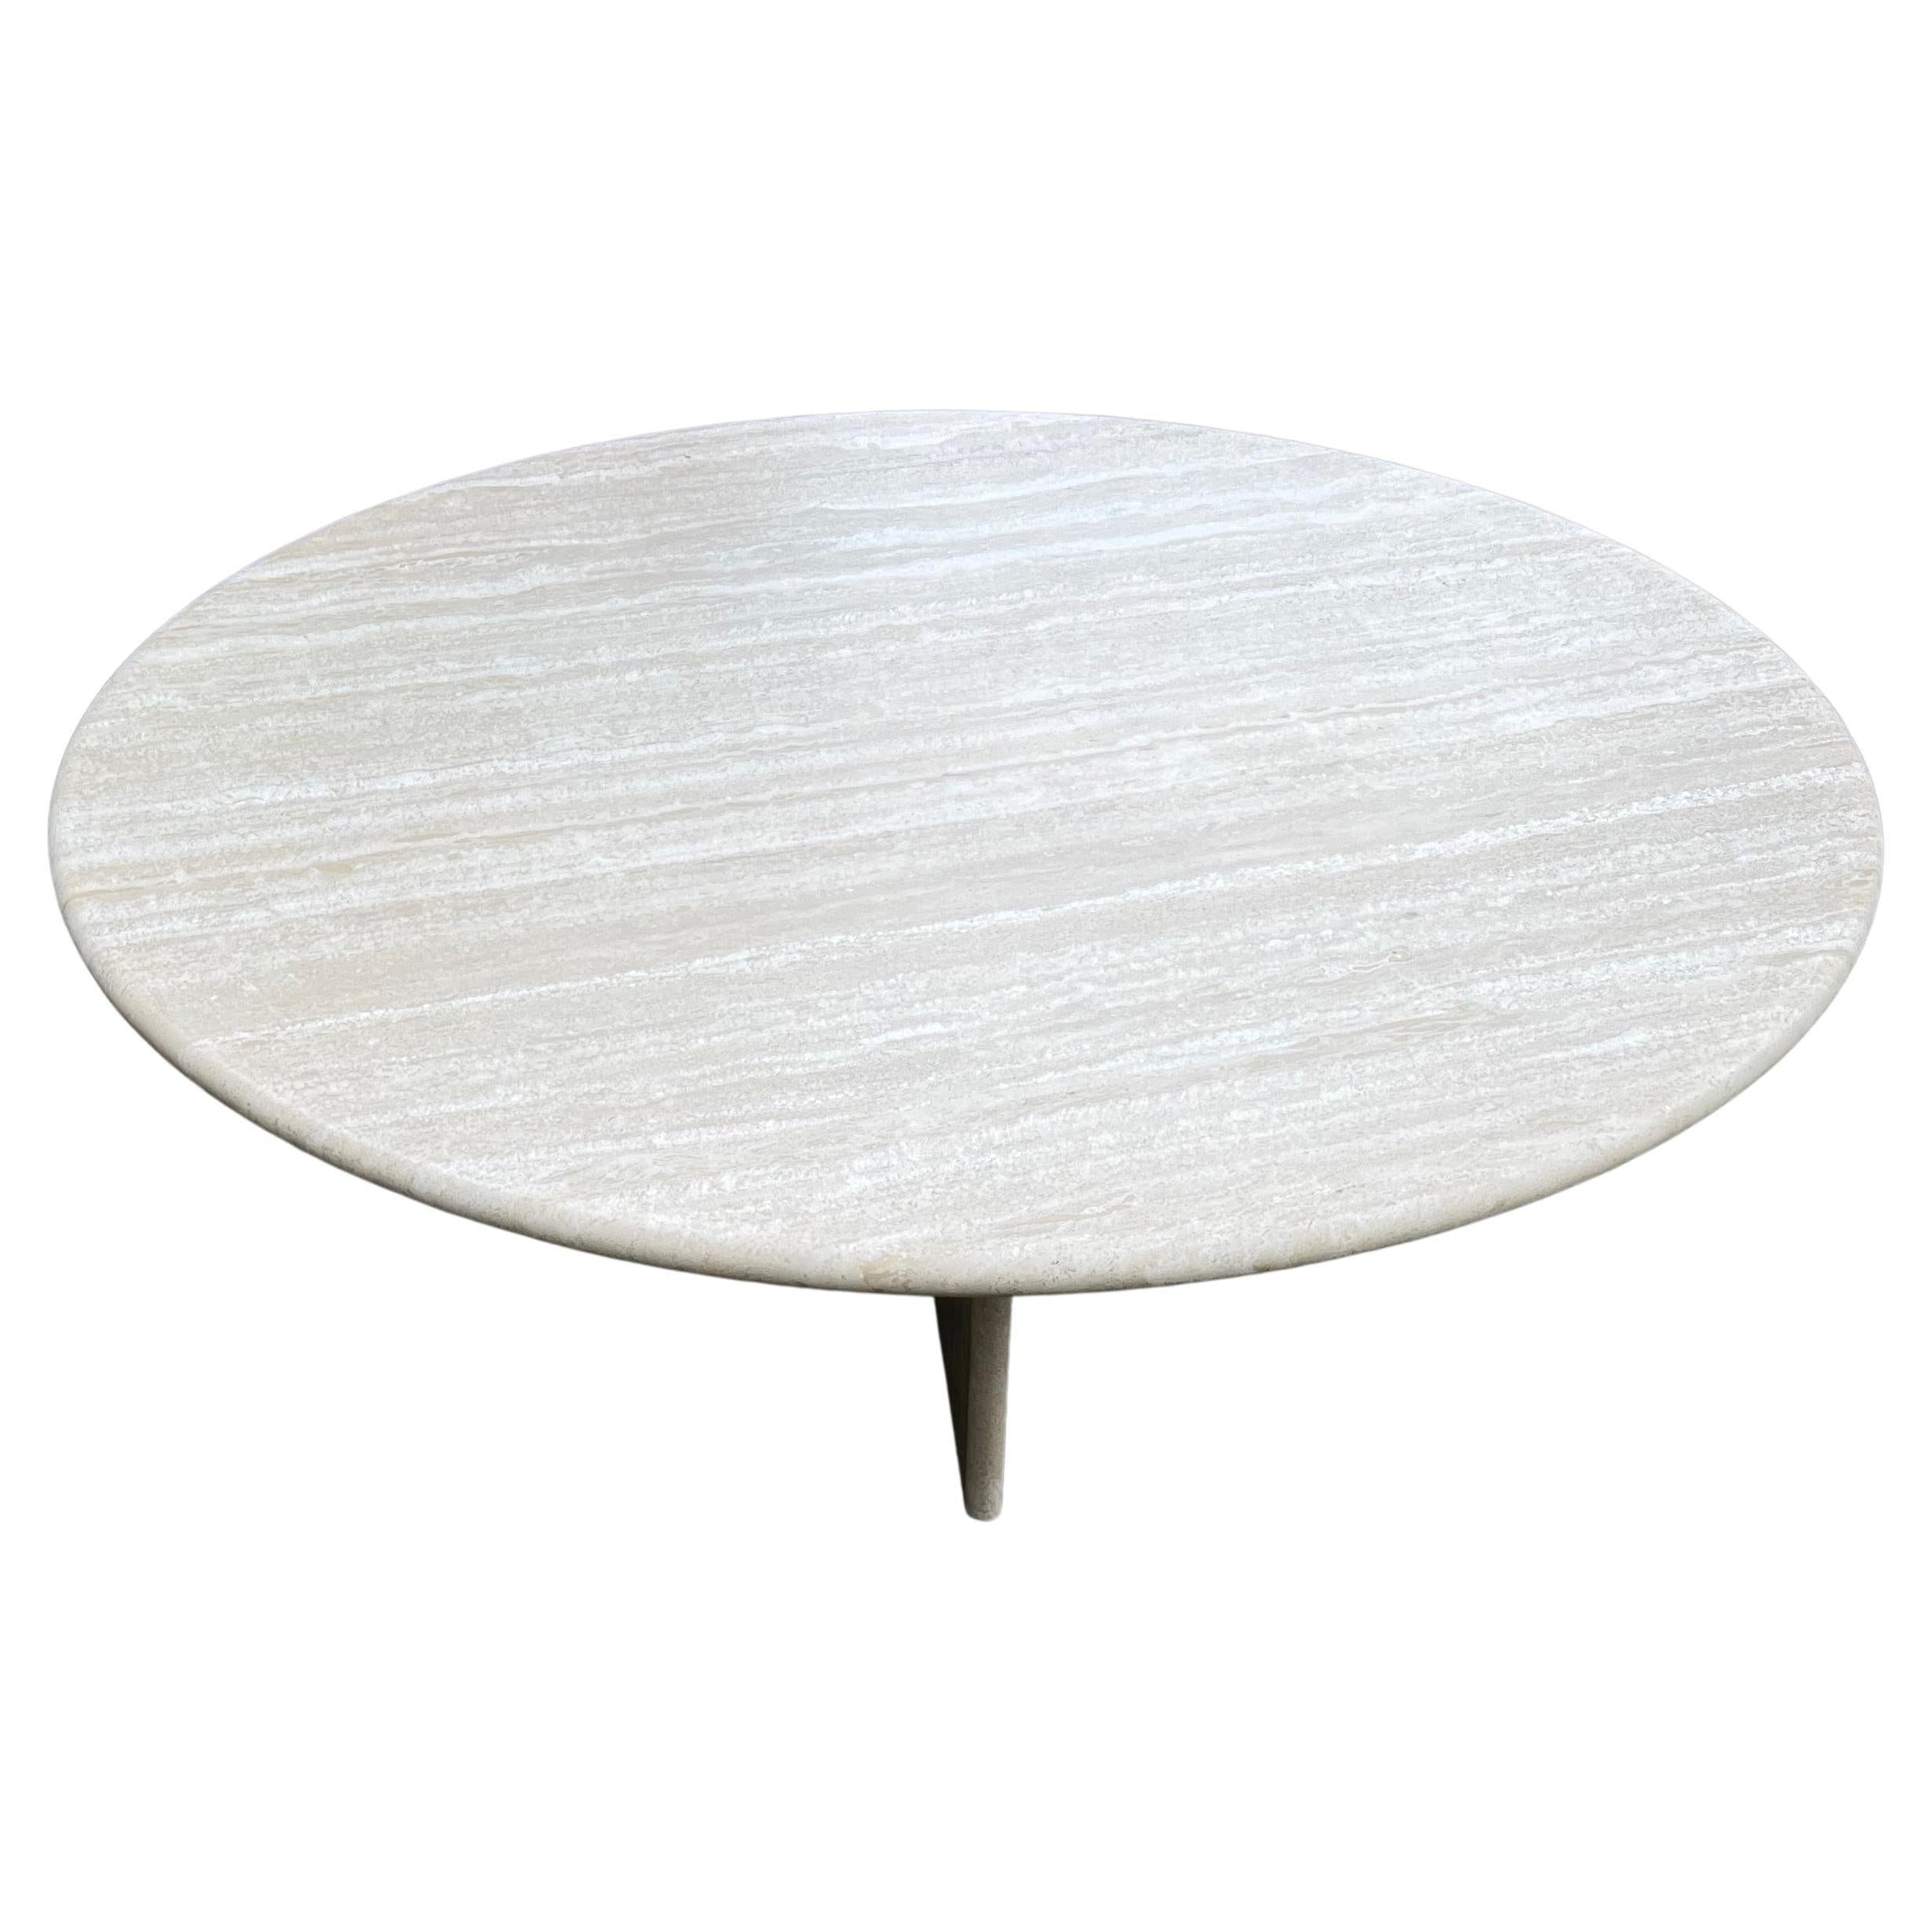 Large Size Mid-Century Art Deco Style Travertine Round Coffee or Cocktail Table